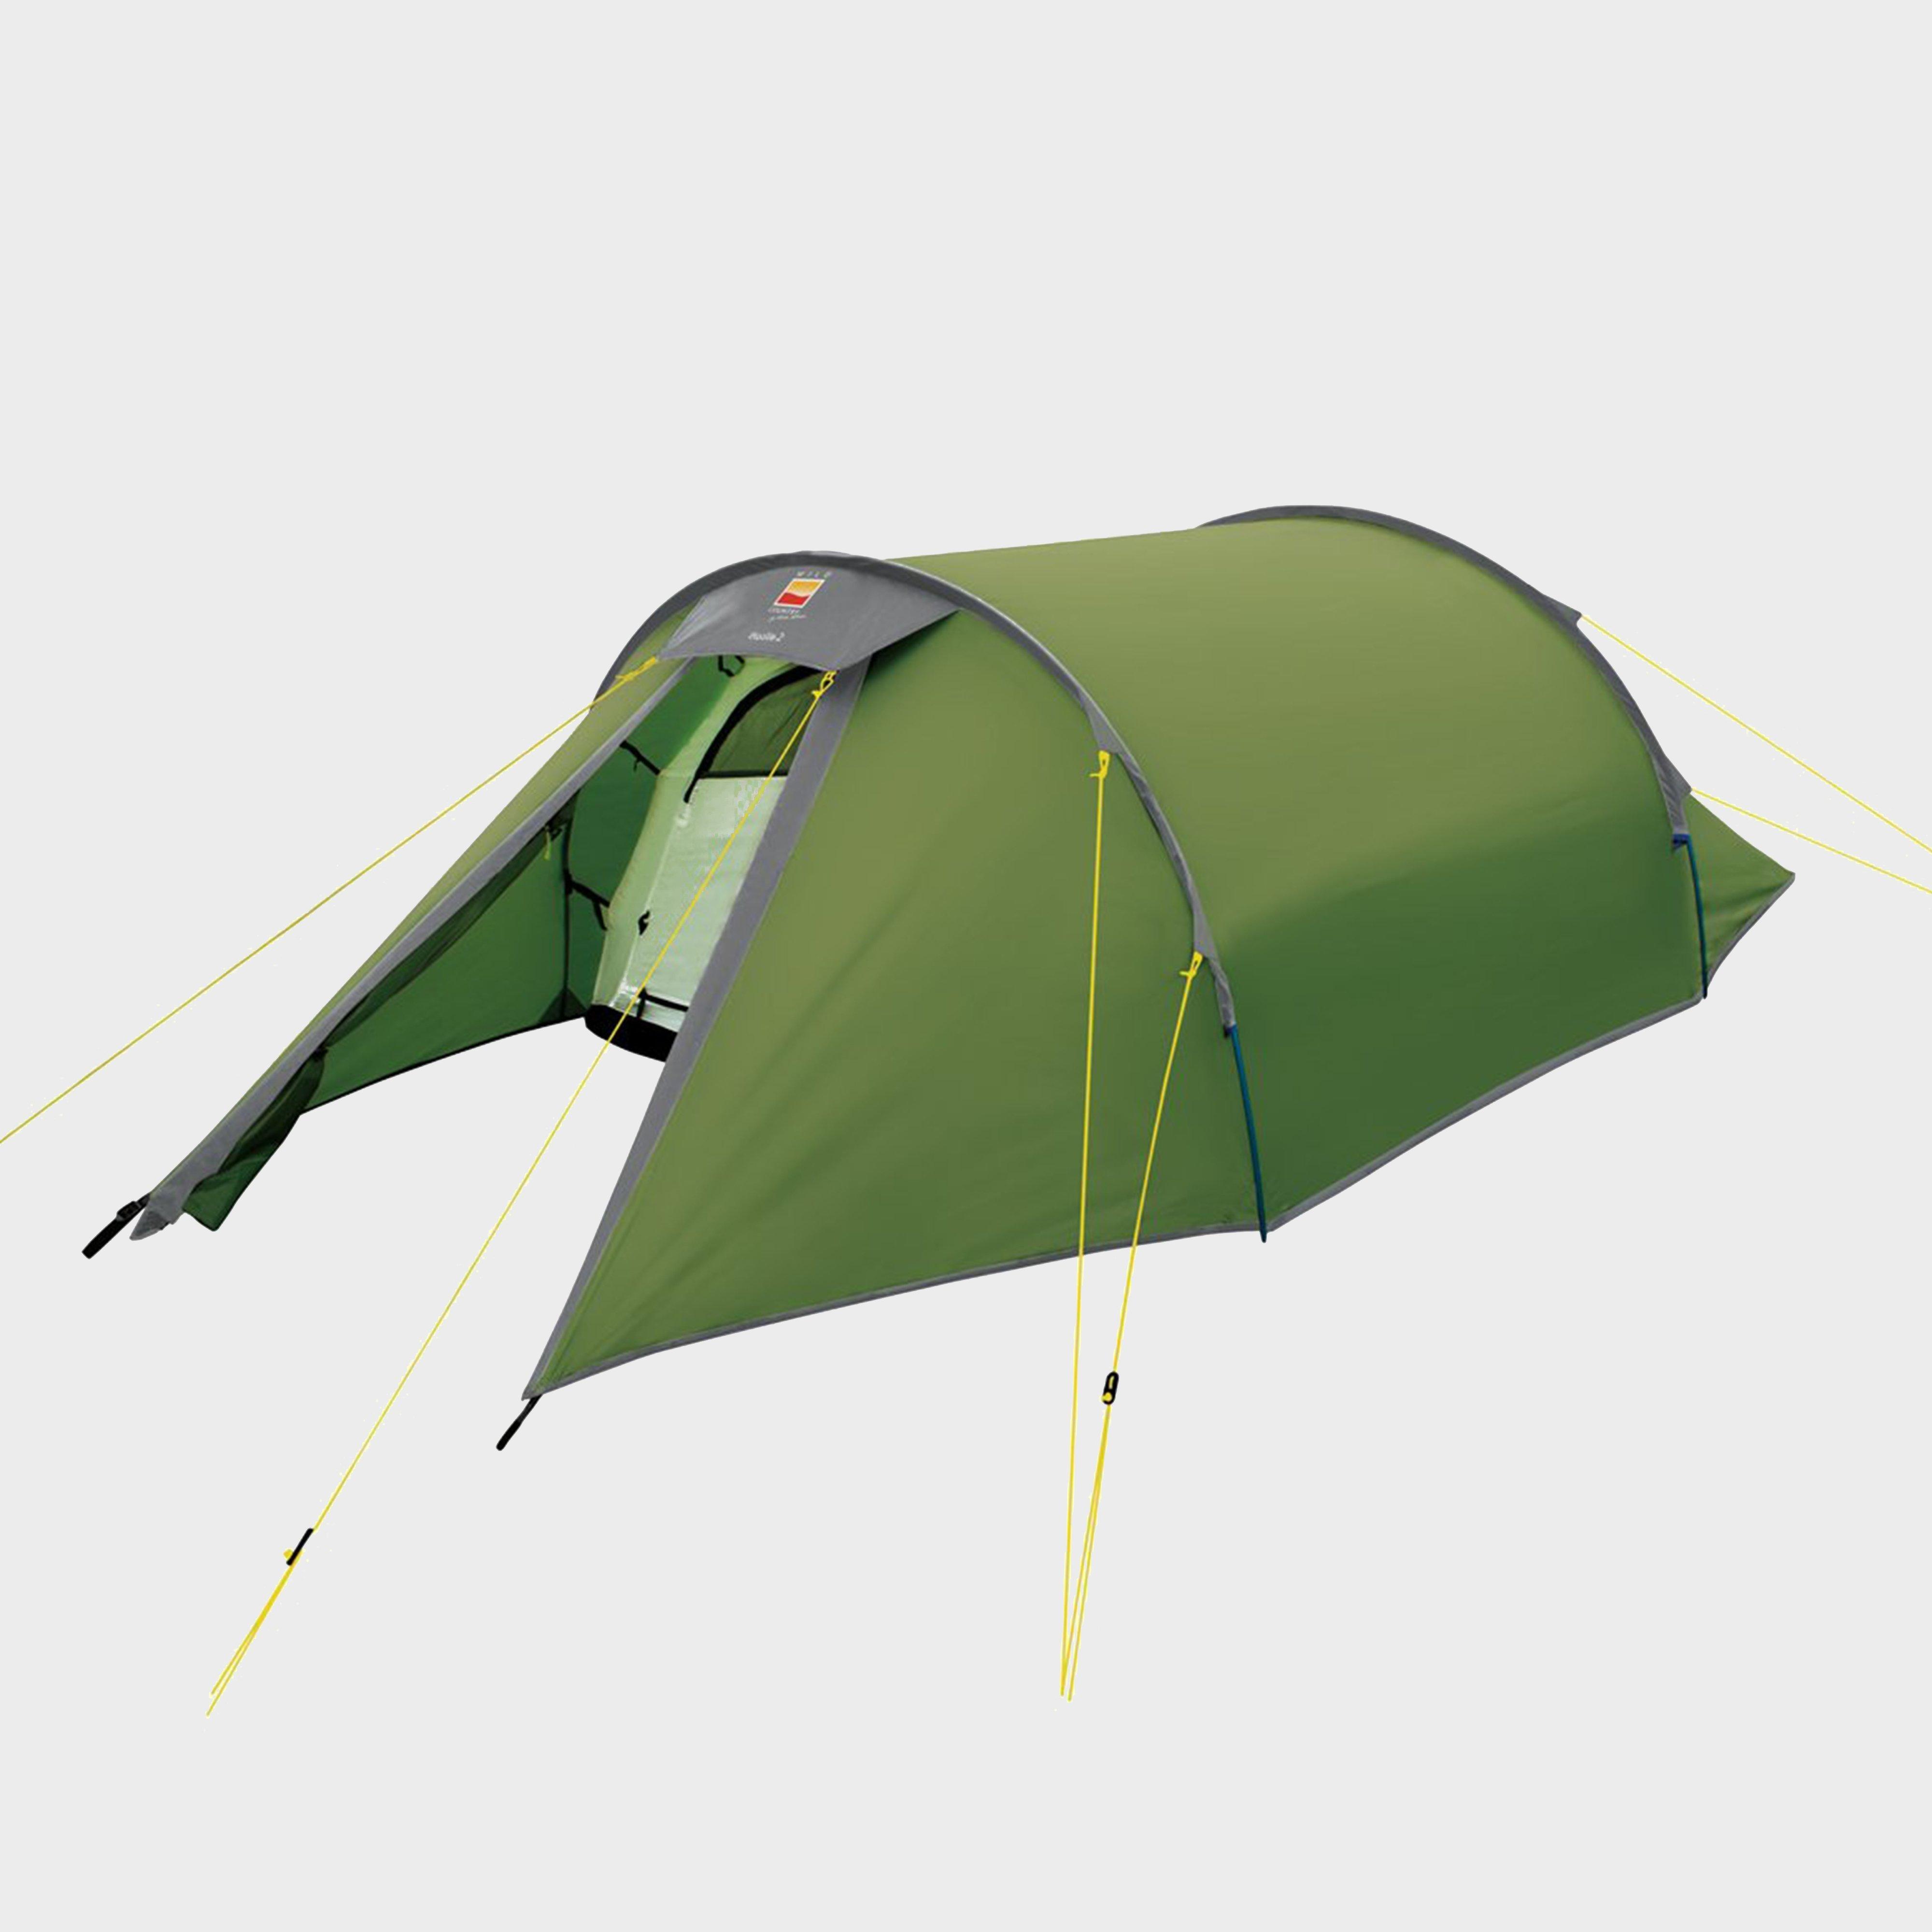  Wild Country Hoolie Campout 2 Tent, Green